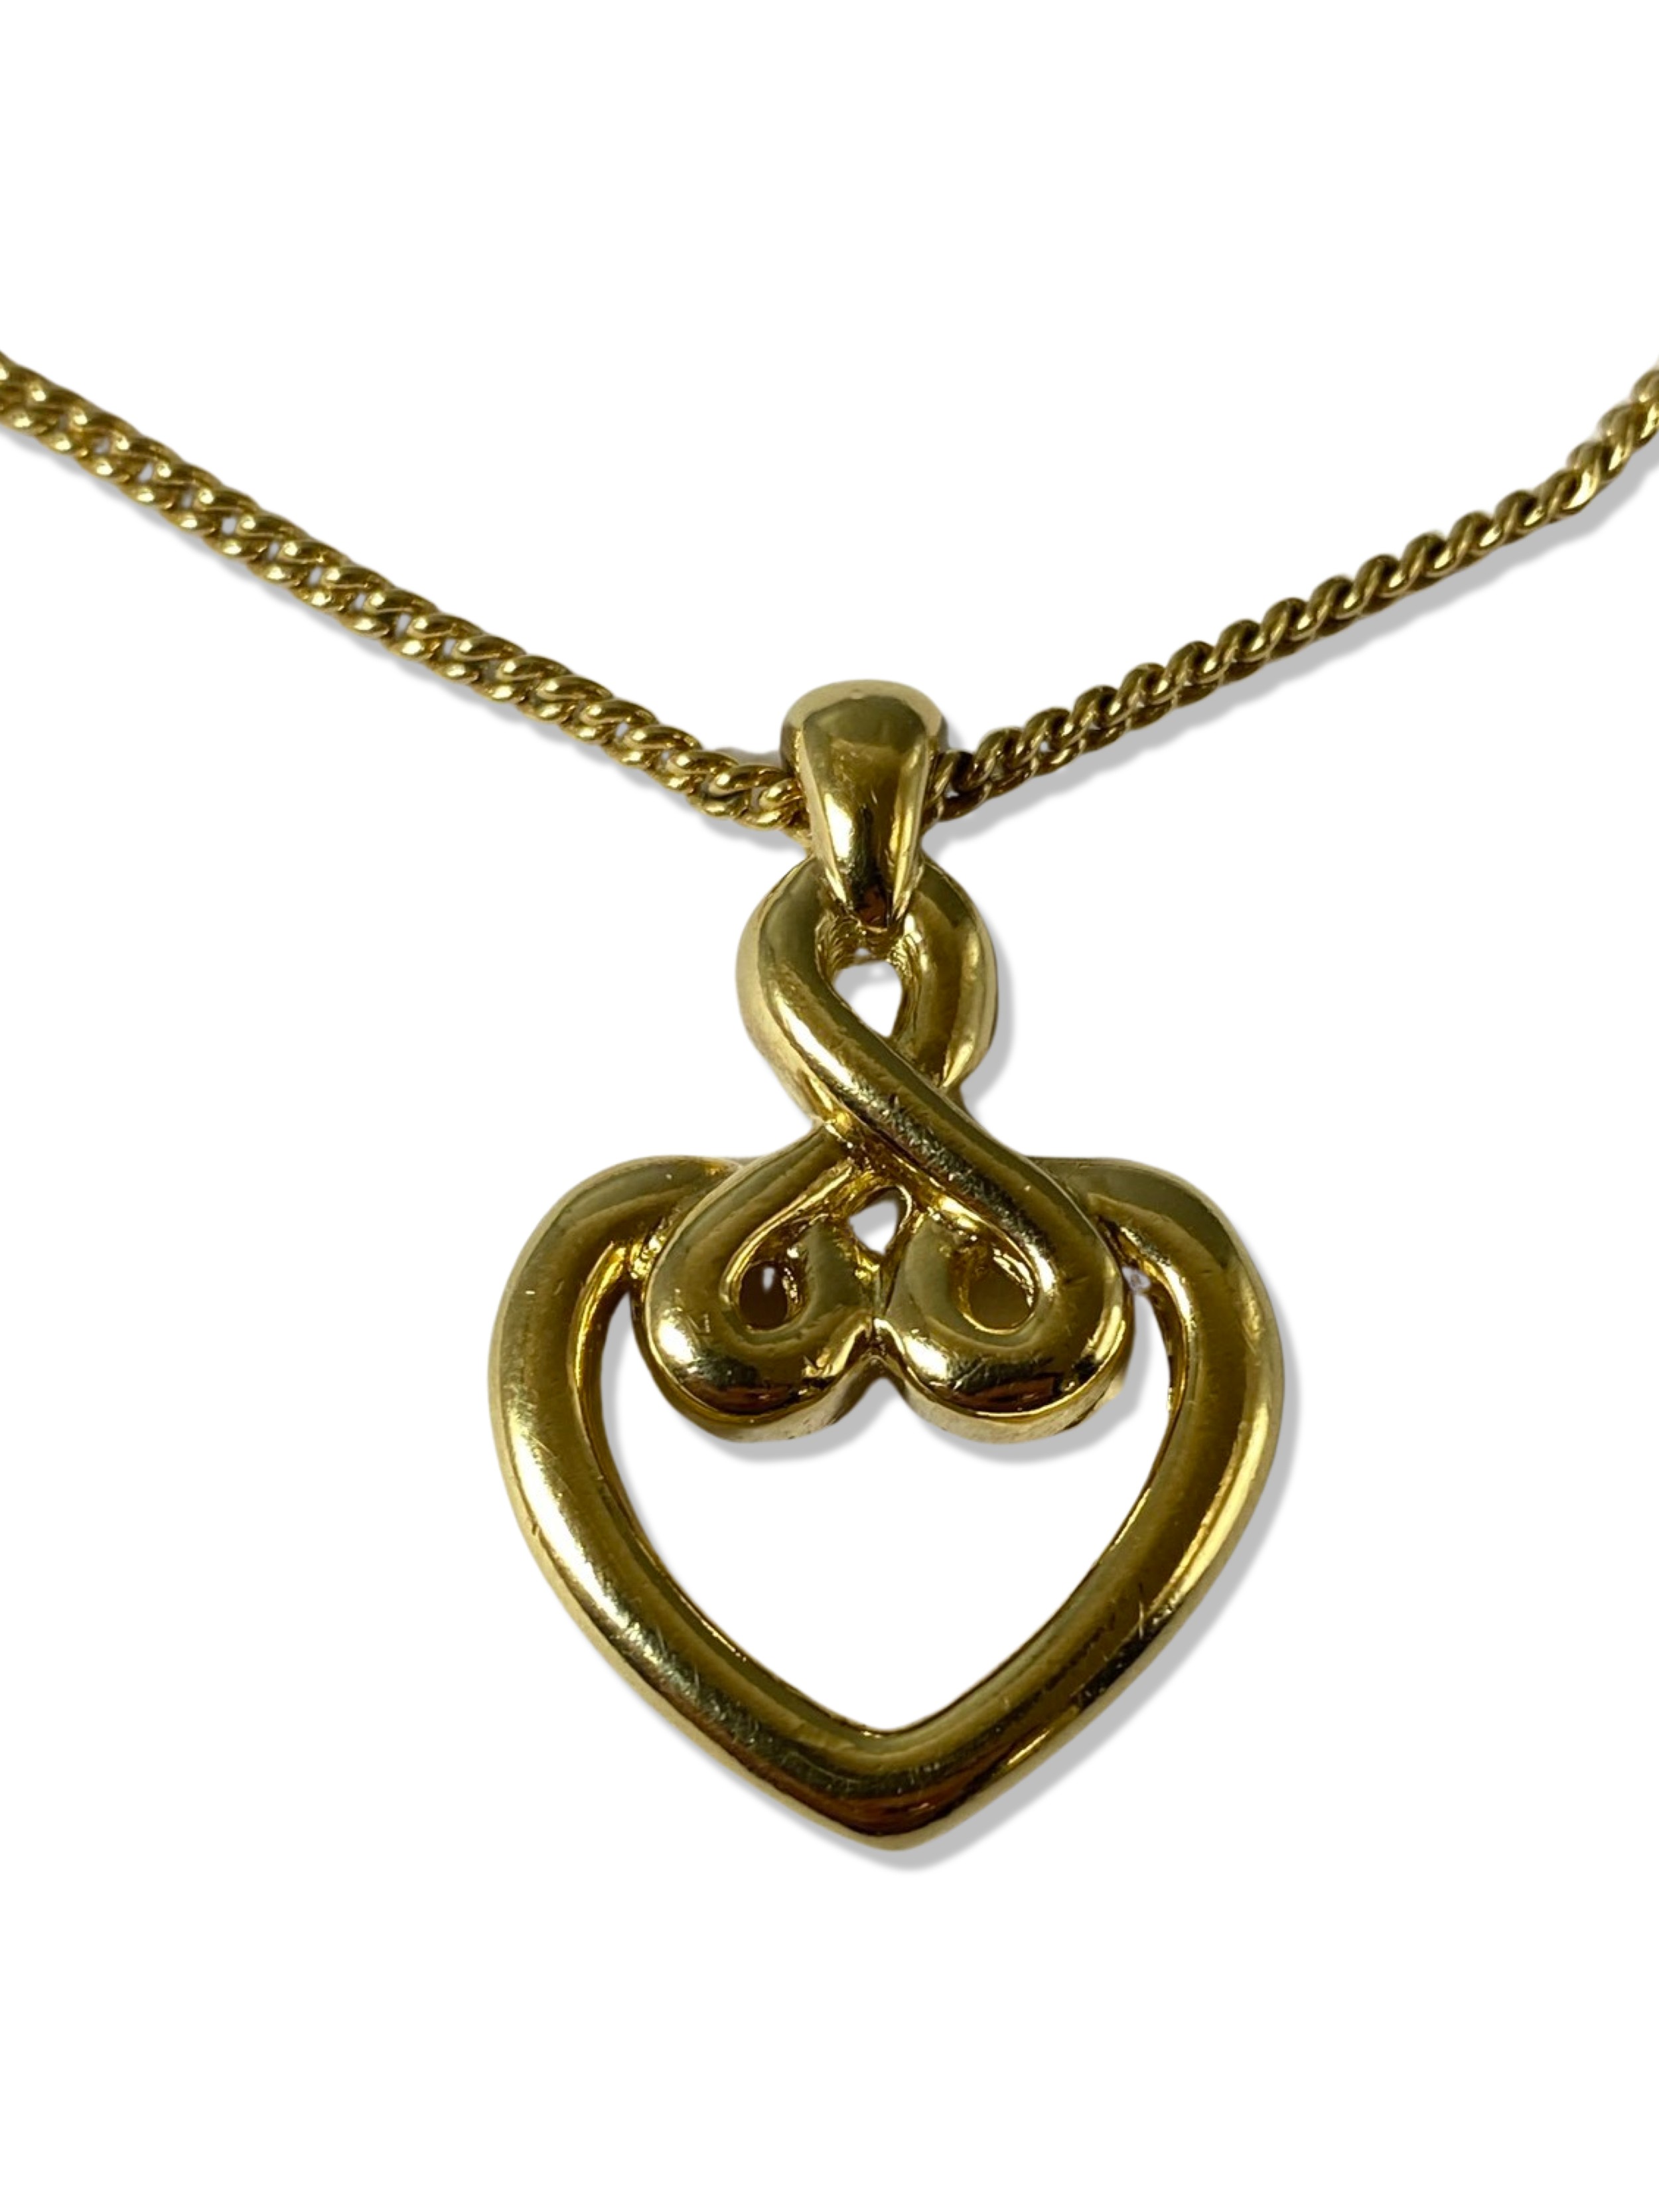 Christine Dior Gold Plated Love Heart Necklace Weighing 8.03 grams and 44cm in length - Image 2 of 3